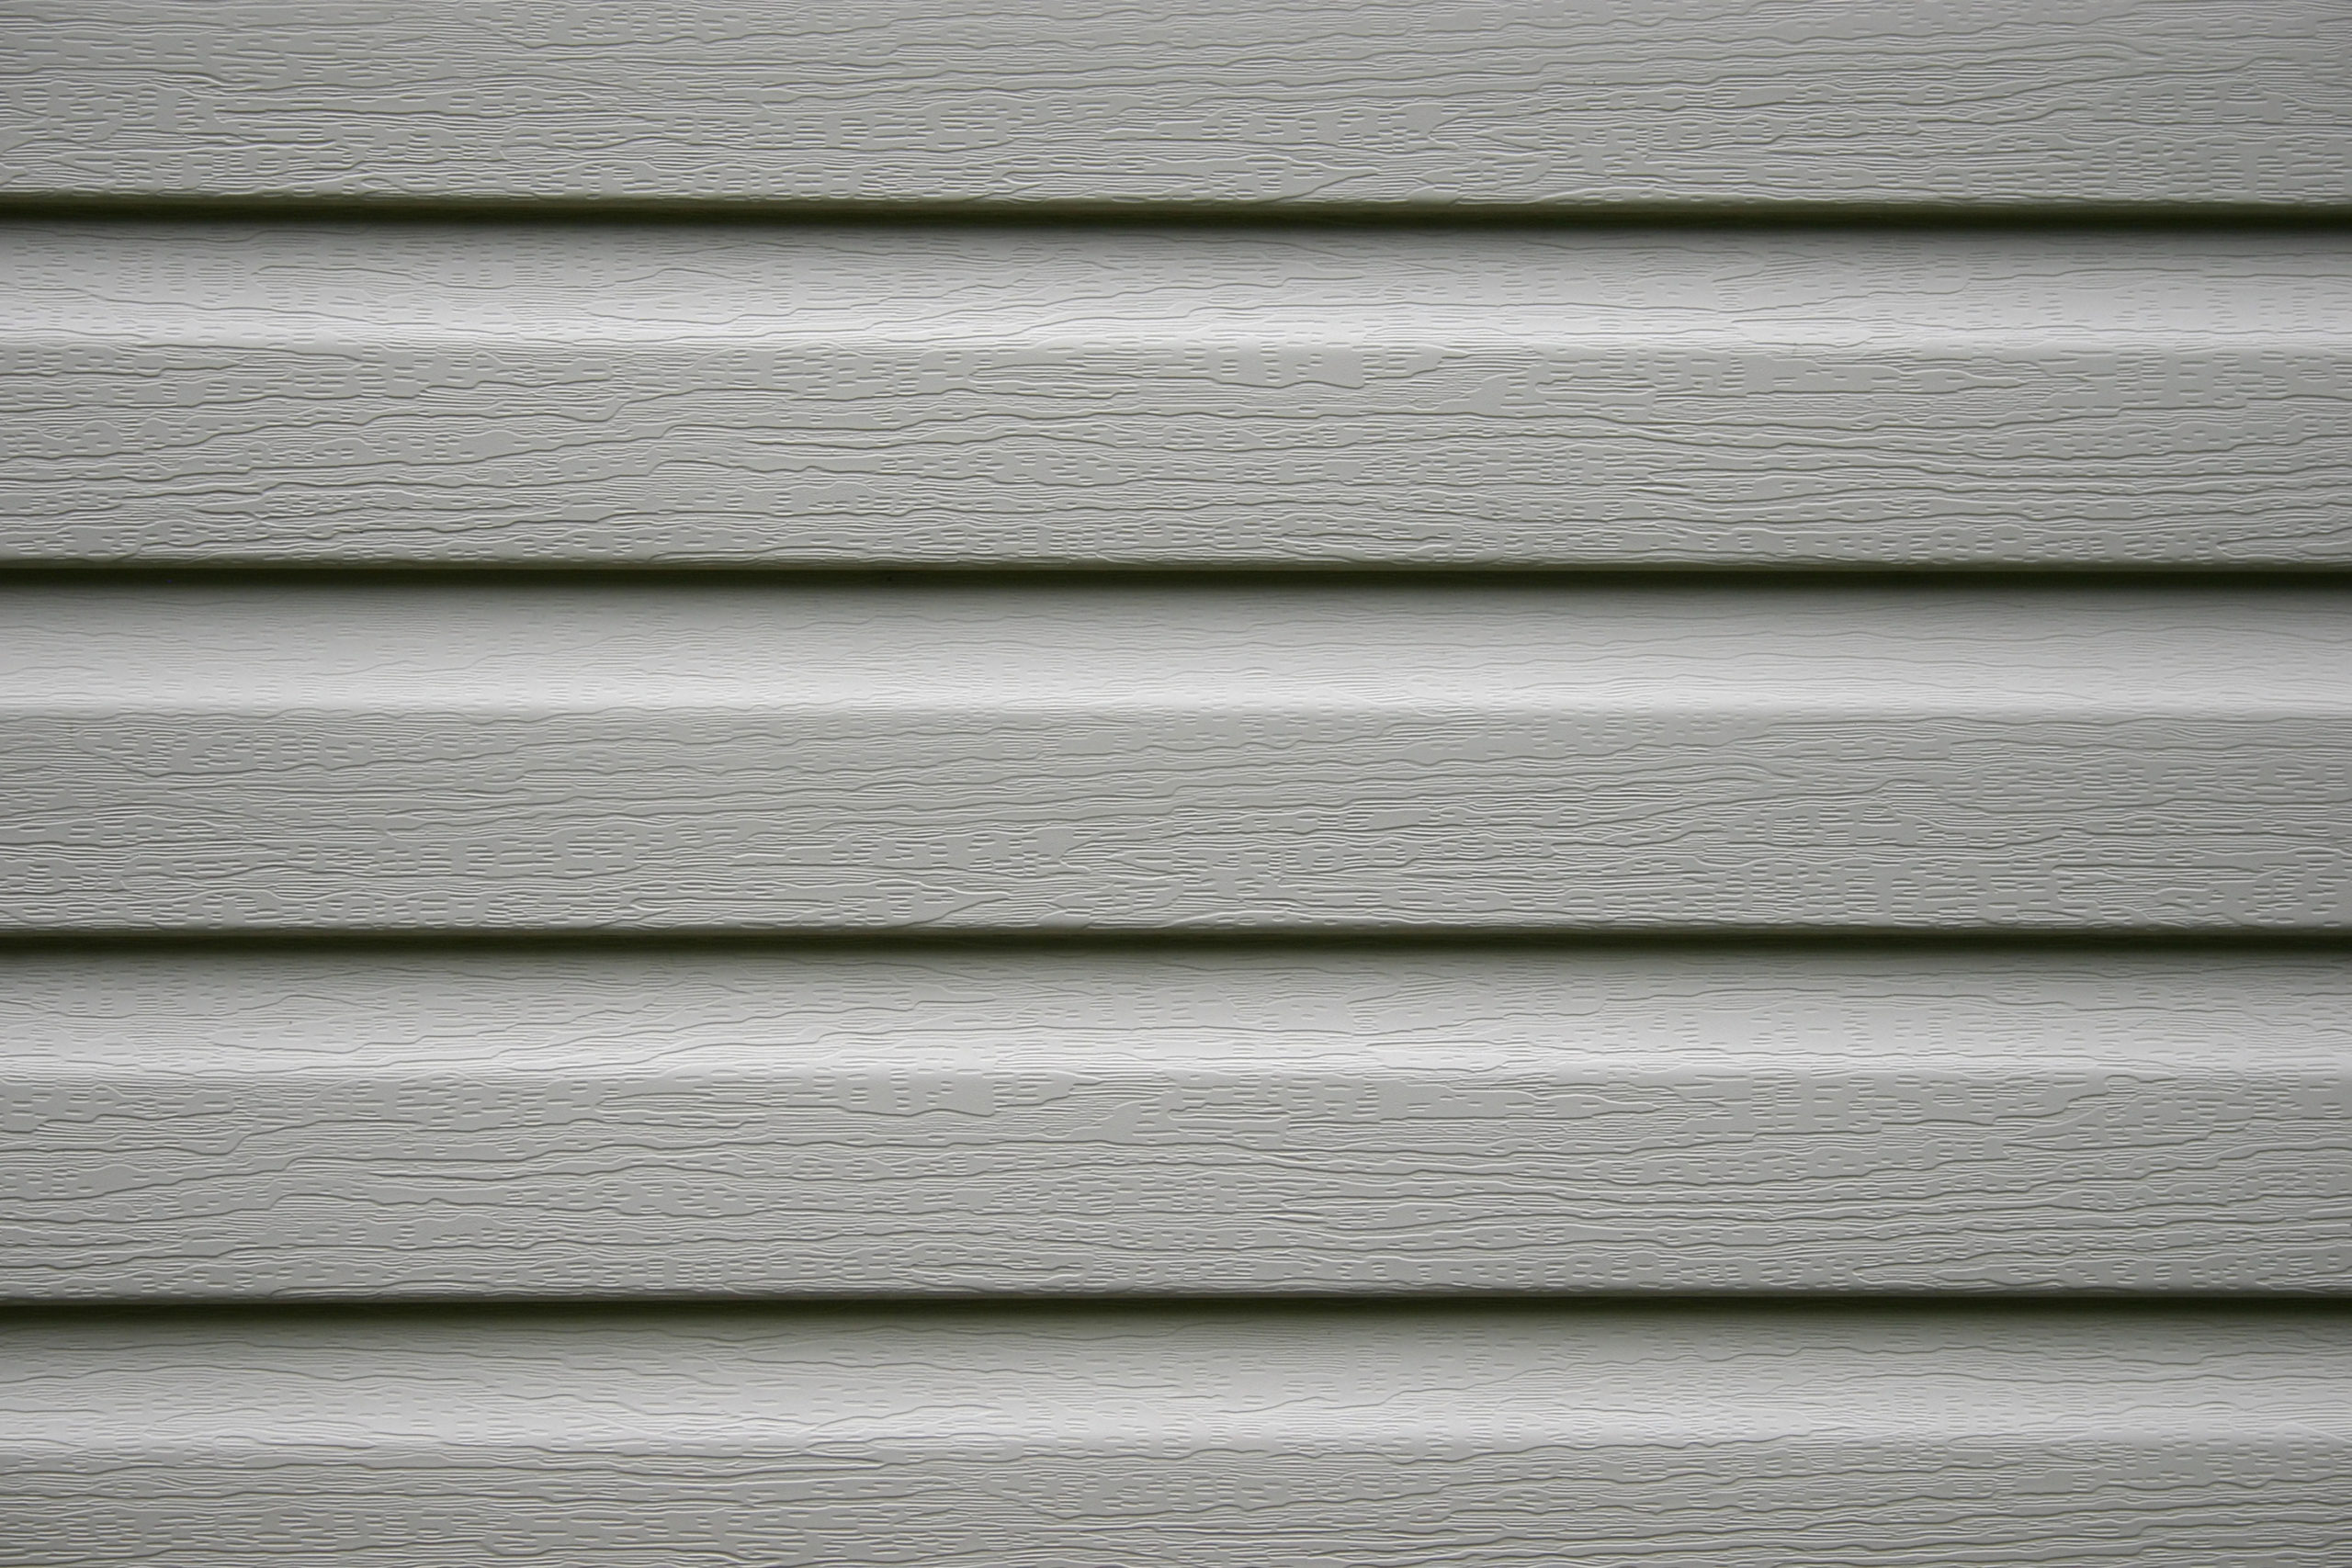 How to Choose the Right Siding for Your Home